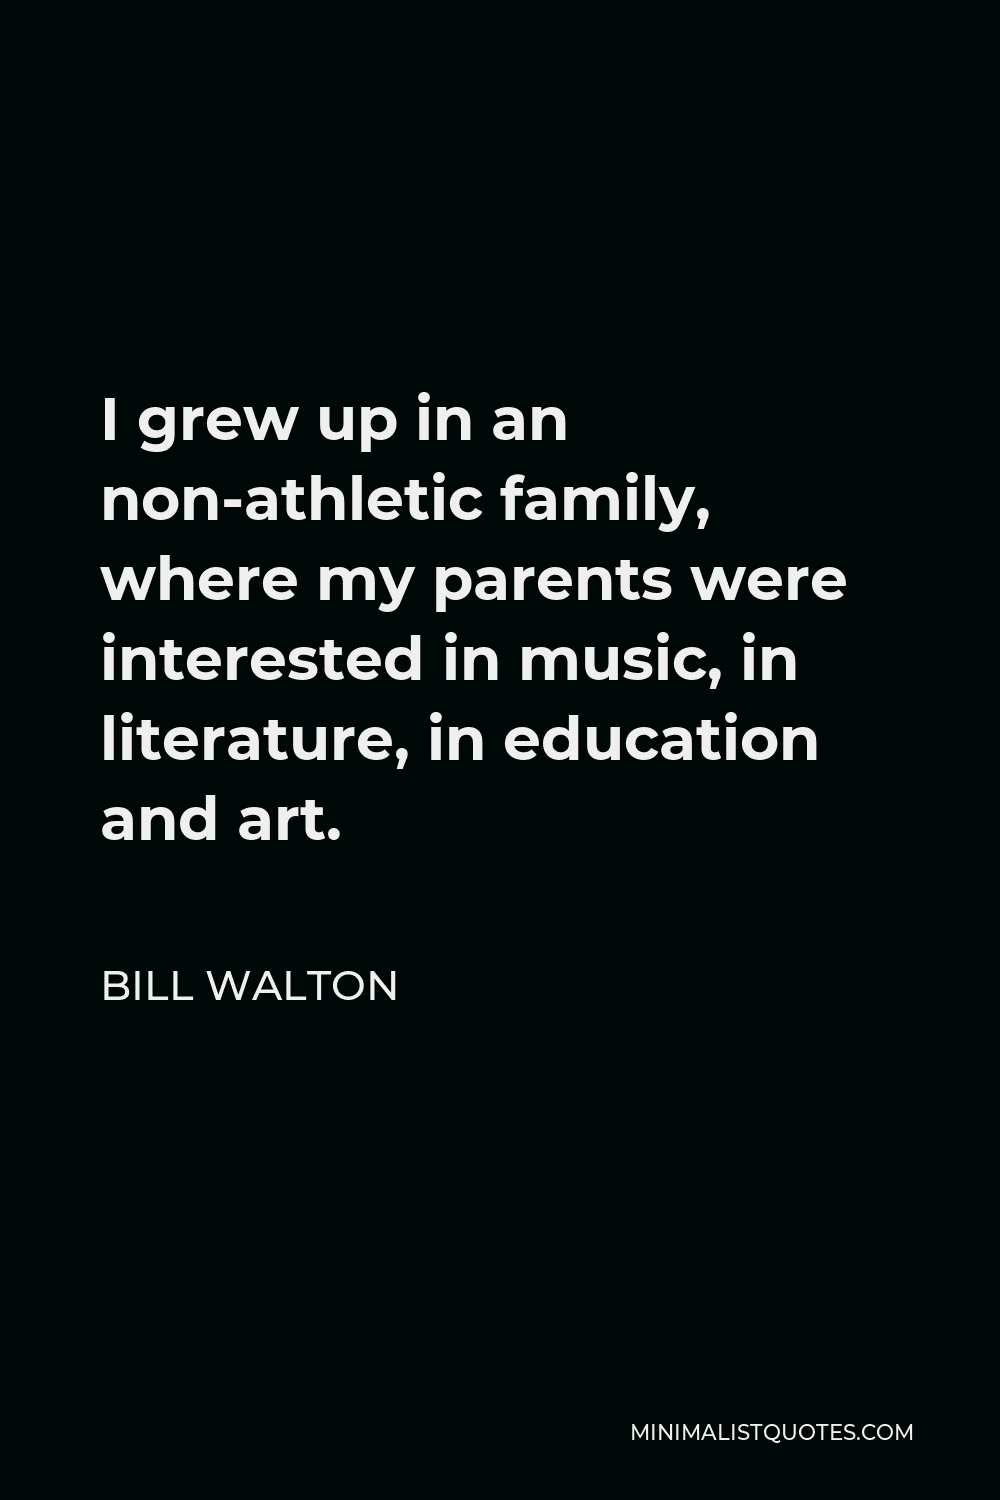 Bill Walton Quote - I grew up in an non-athletic family, where my parents were interested in music, in literature, in education and art.